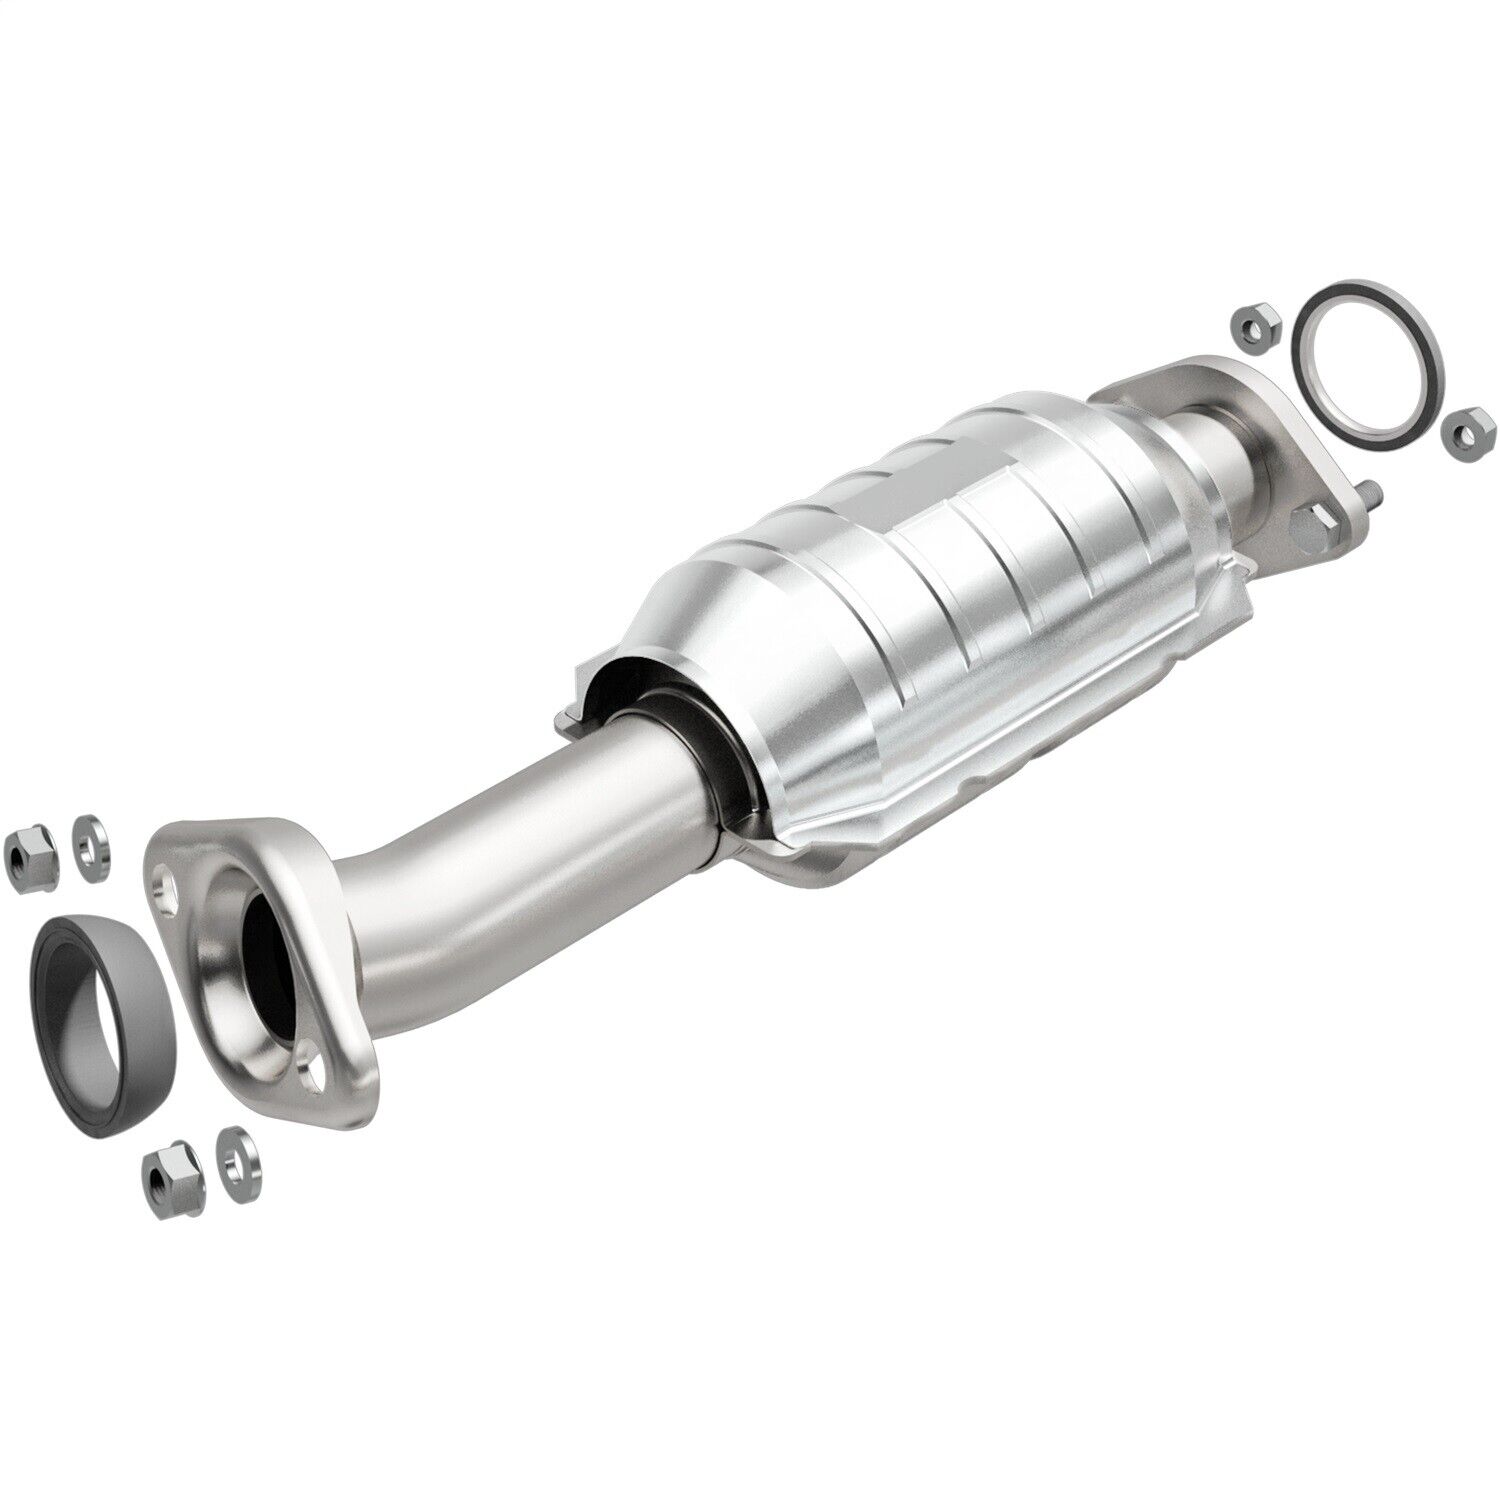 MagnaFlow 49 State Converter 51672 Direct Fit Catalytic Converter Fits Aerio